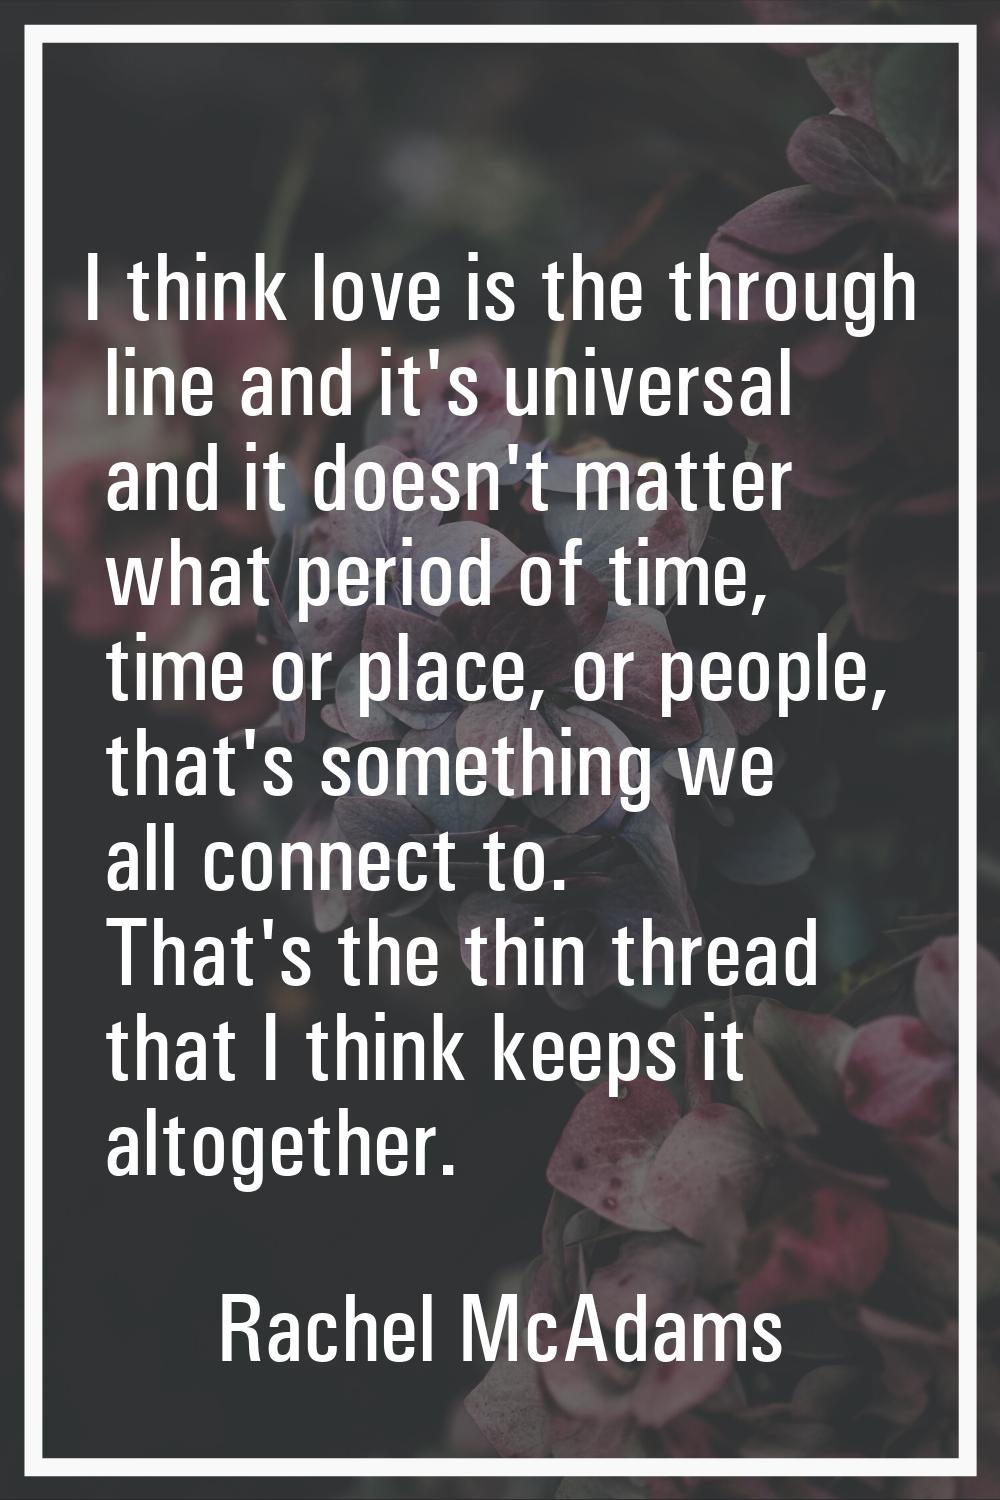 I think love is the through line and it's universal and it doesn't matter what period of time, time